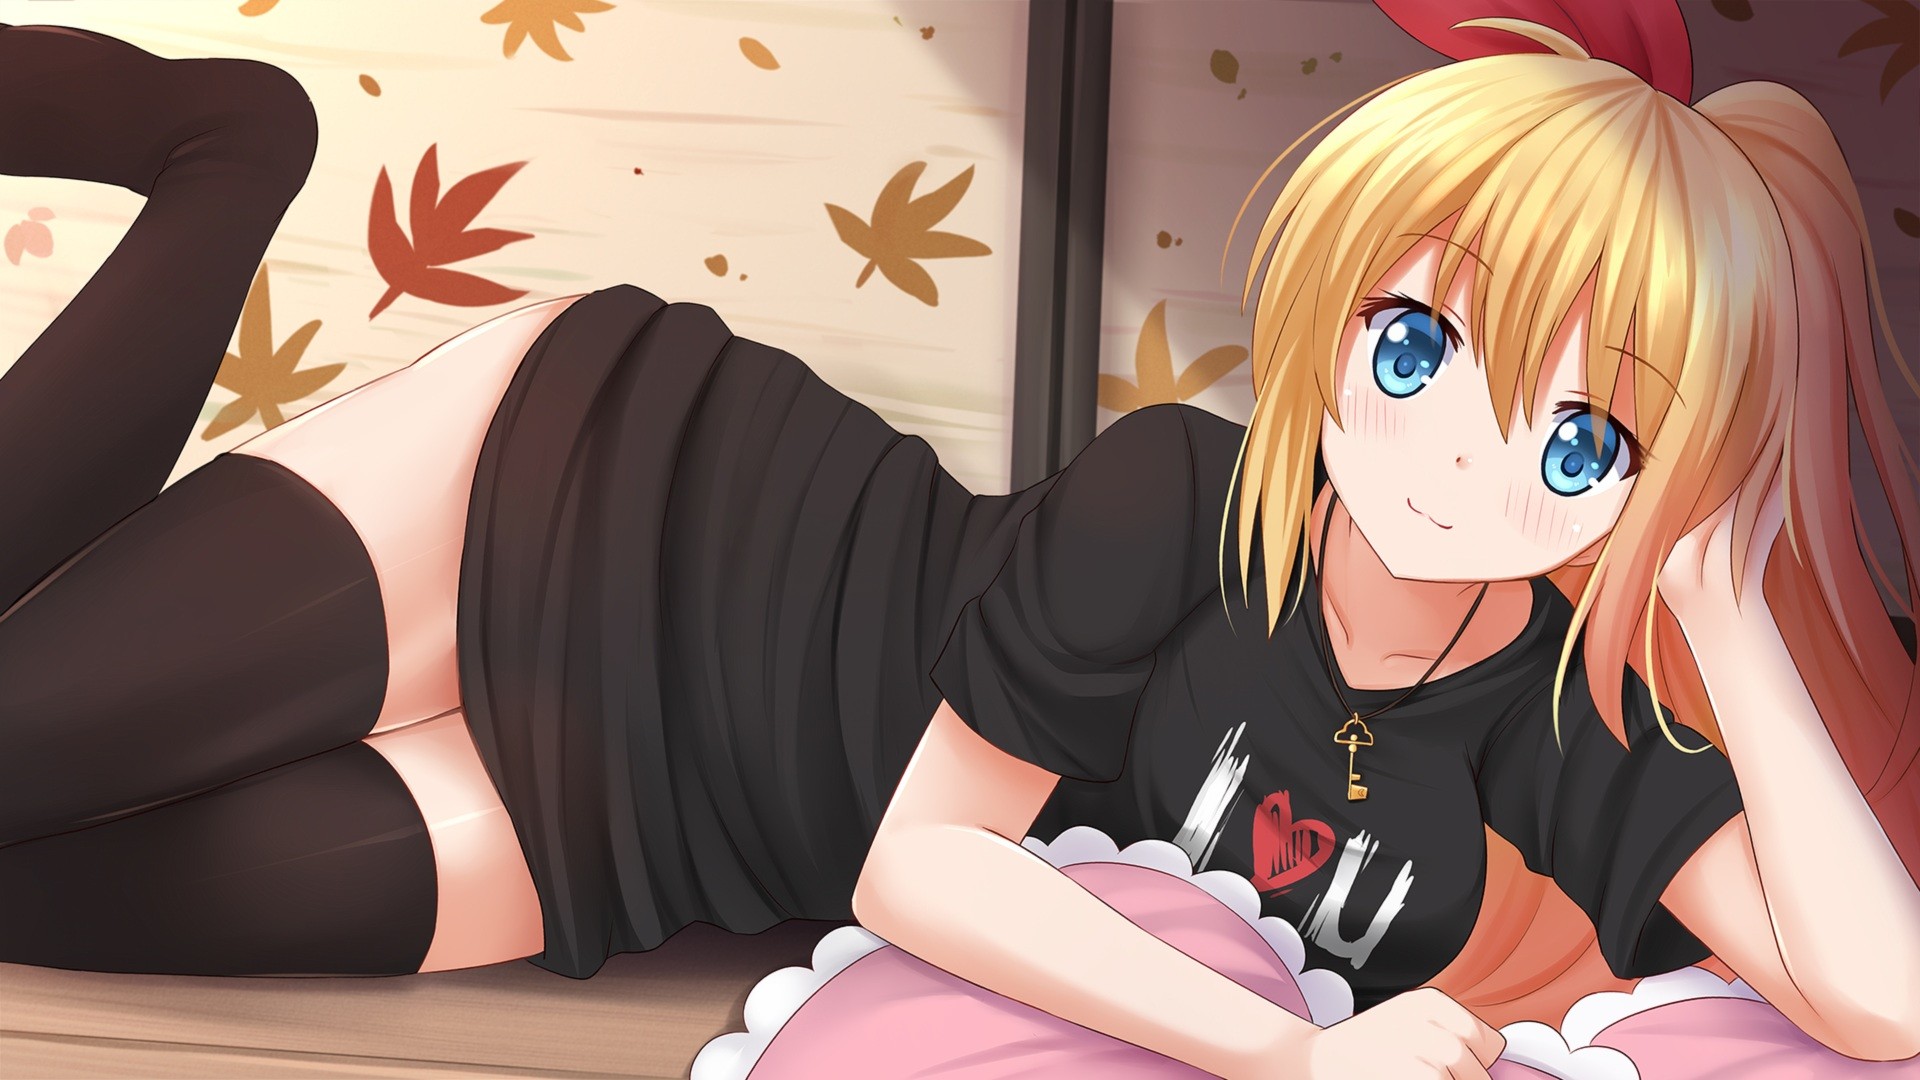 Anime 1920x1080 anime anime girls Nisekoi Kirisaki Chitoge blonde blue eyes hair ornament smiling thigh-highs legs together stockings printed shirts black stockings Pixiv looking at viewer necklace